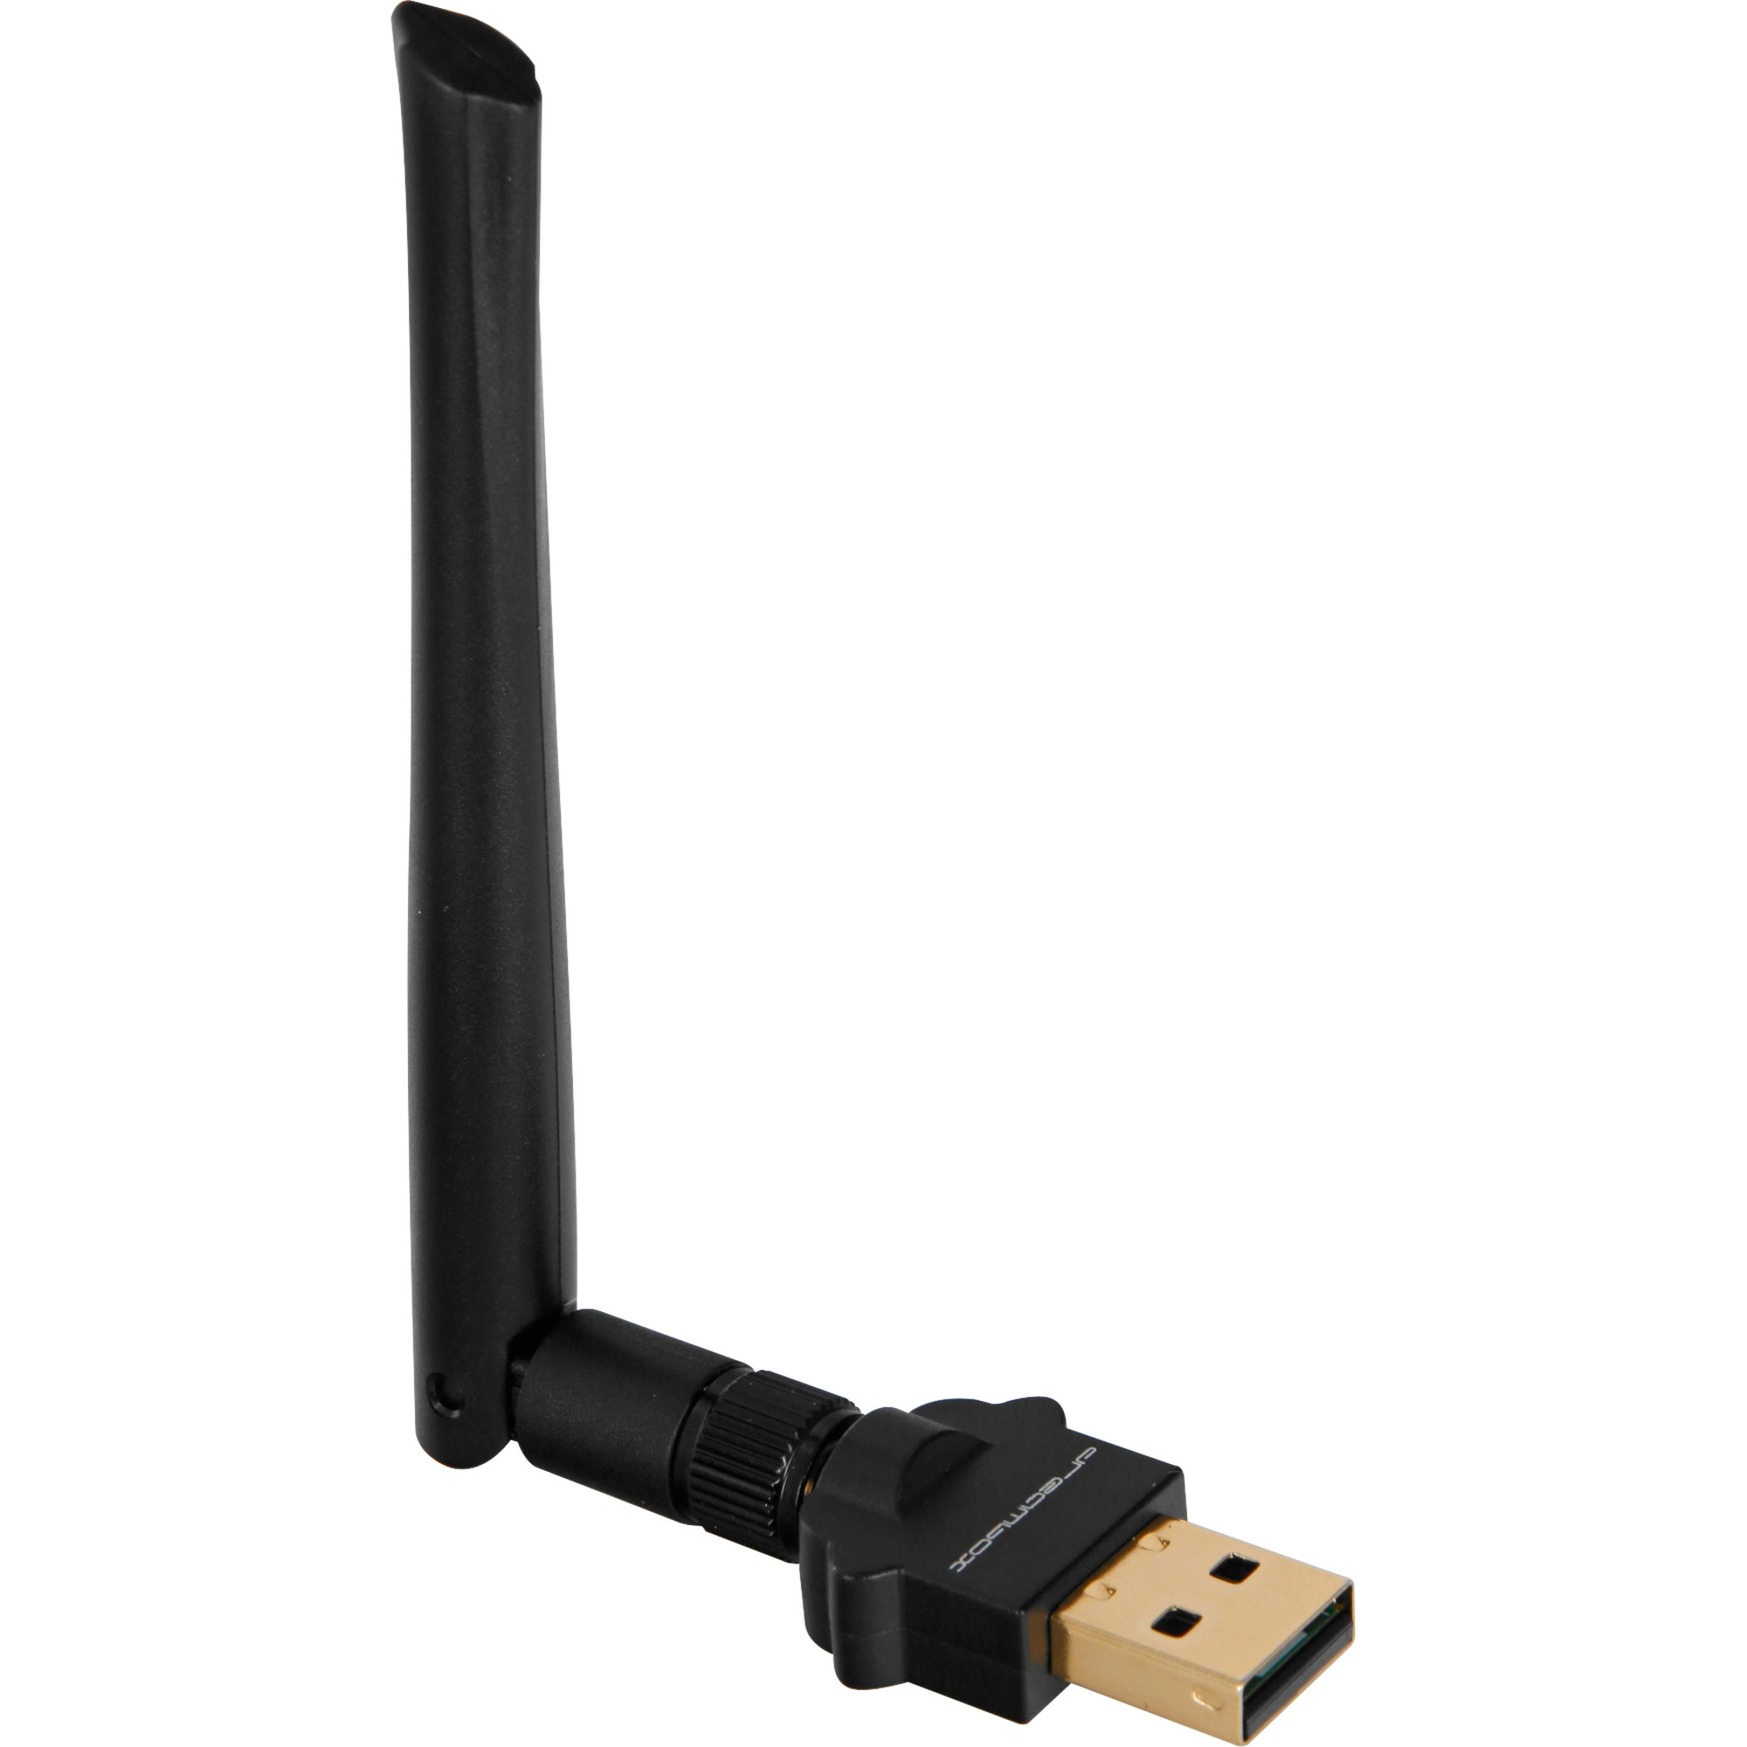 Dreambox Dual Band Wireless USB 2.0 Adapter 1300 Mbps inkl. Antenne